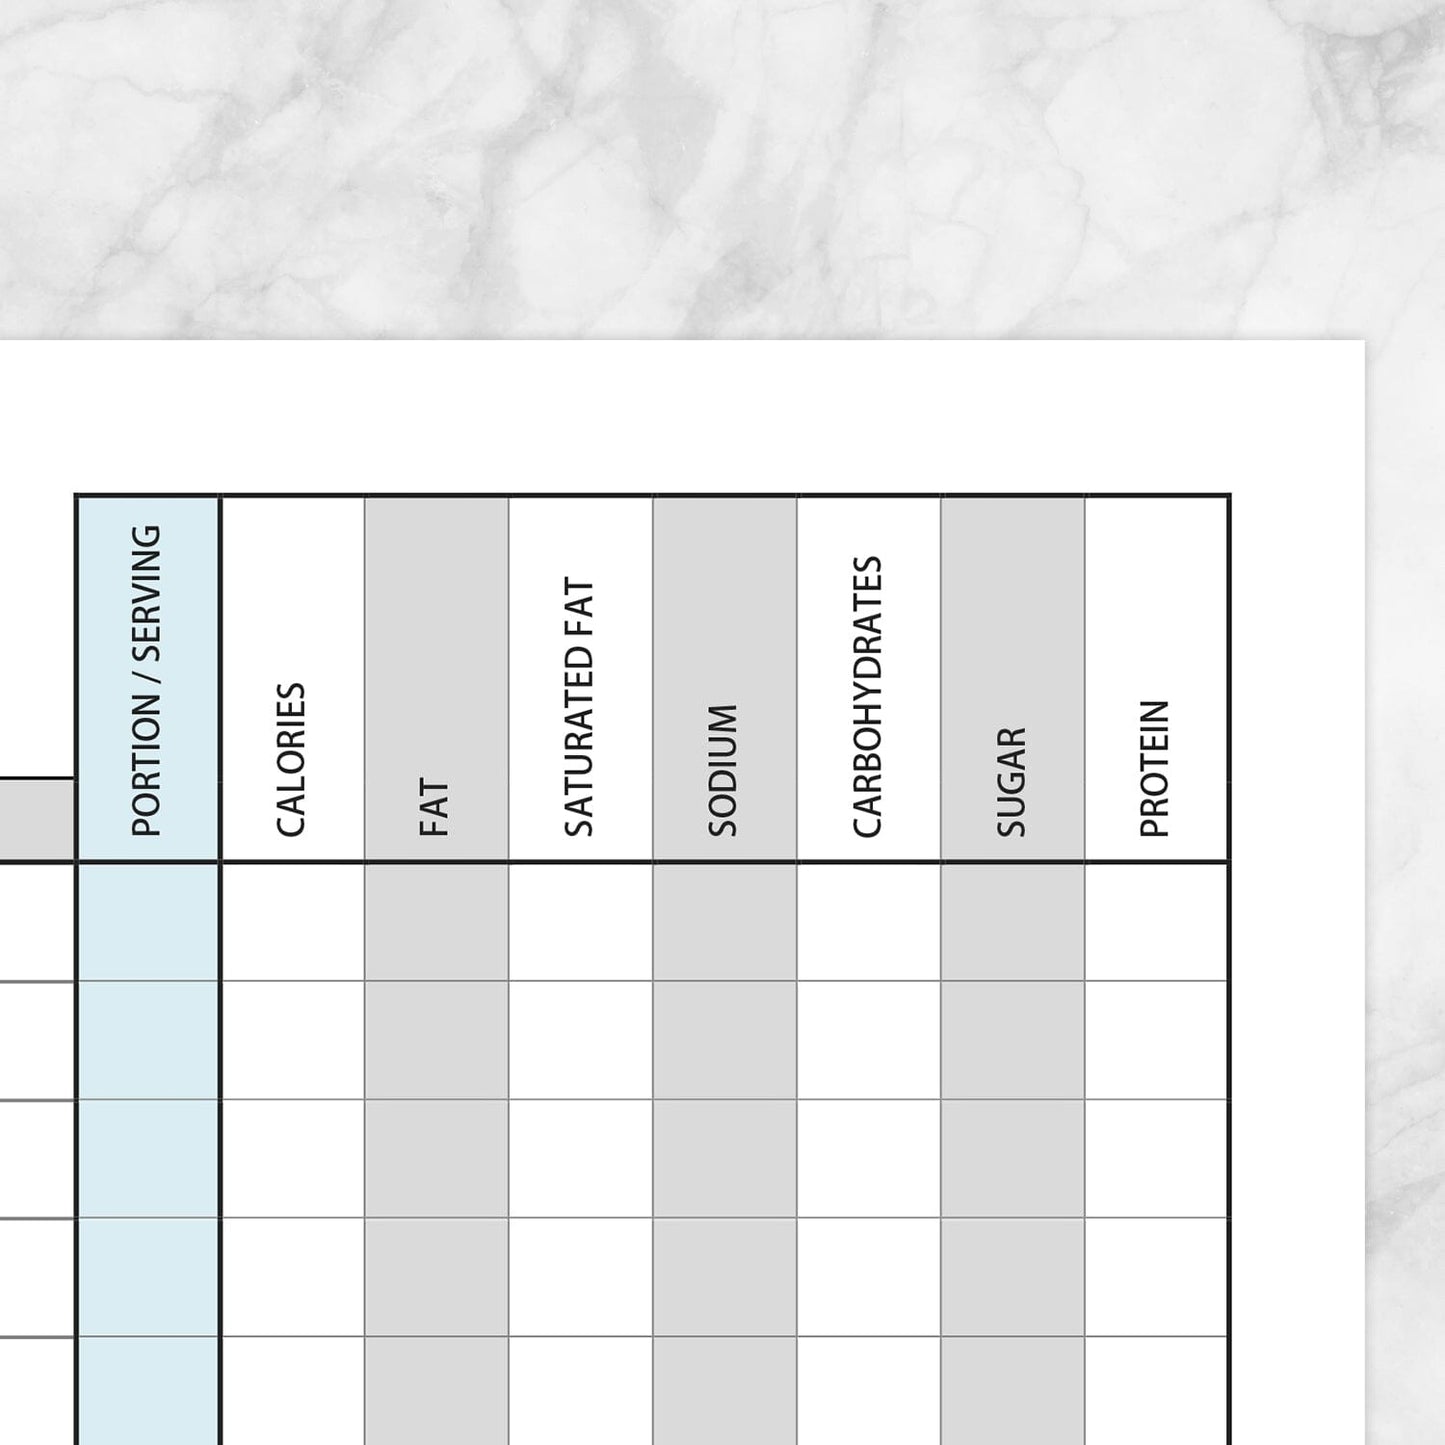 Printable Daily Food Content Tracking Sheet at Printable Planning. Closer view of the column categories.